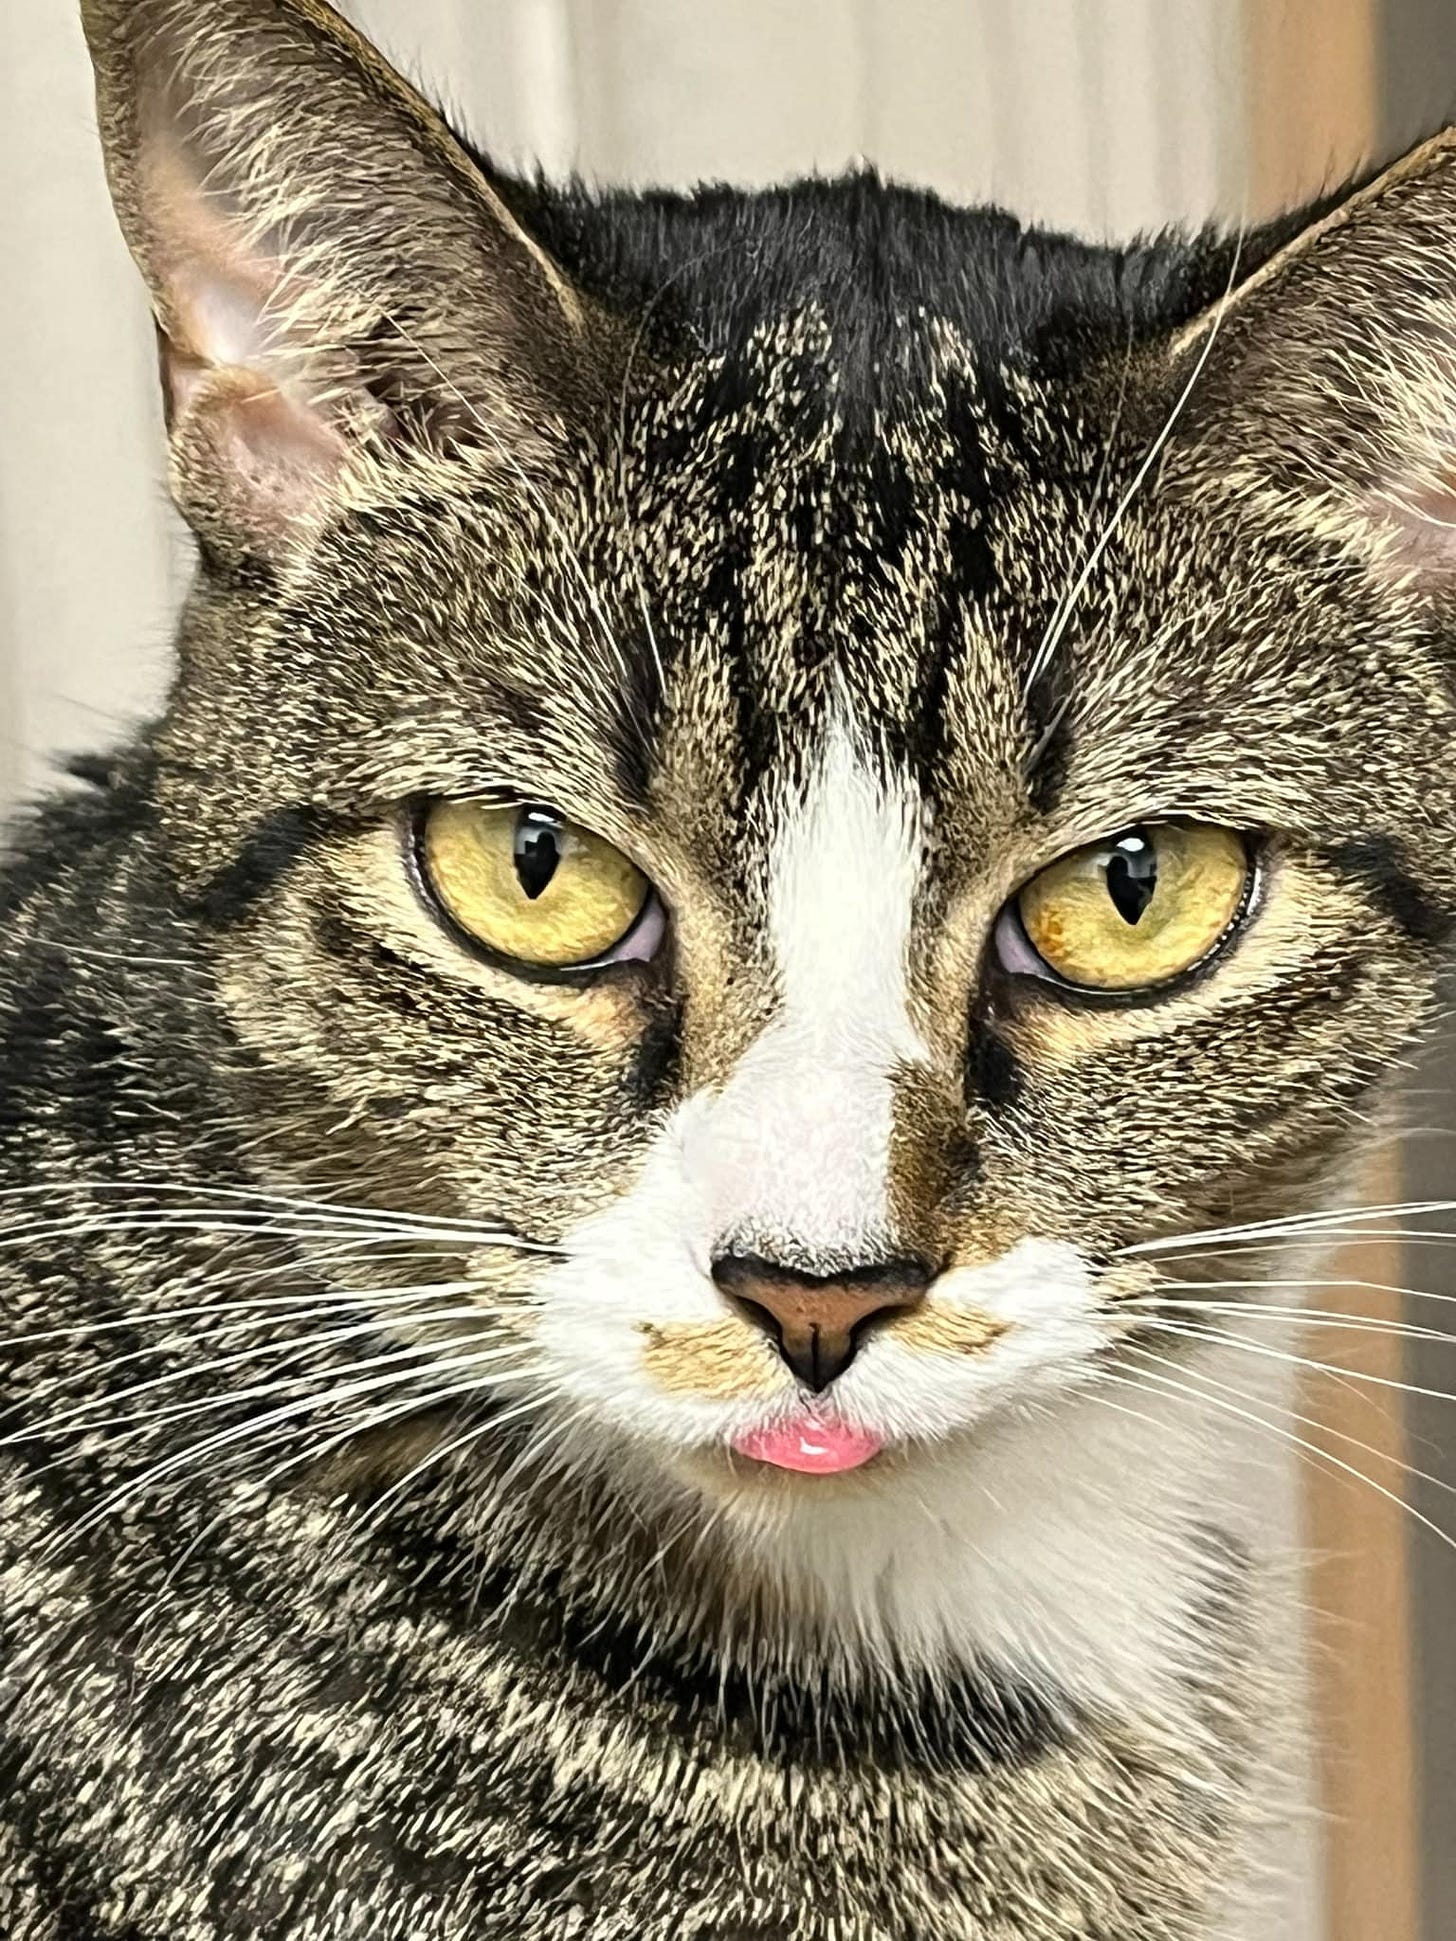 Brown tabby with white markings faces the camera, tip of her tiny pink tongue sticking out